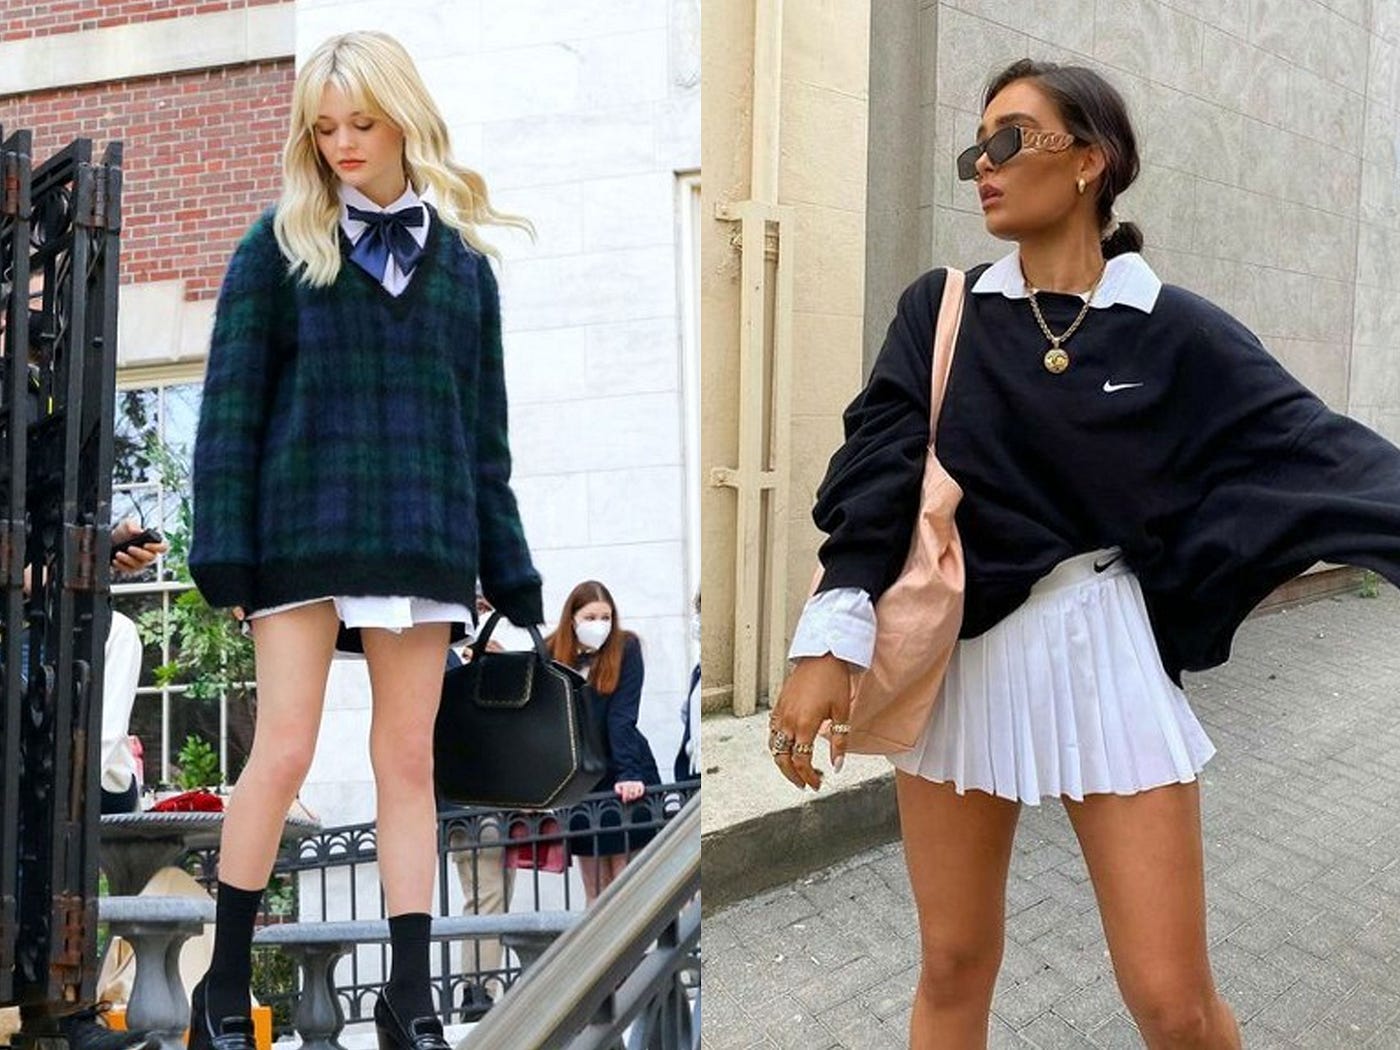 Preppy Style Is Back In 2022. Here's How to Wear It | THREAD by ZALORA